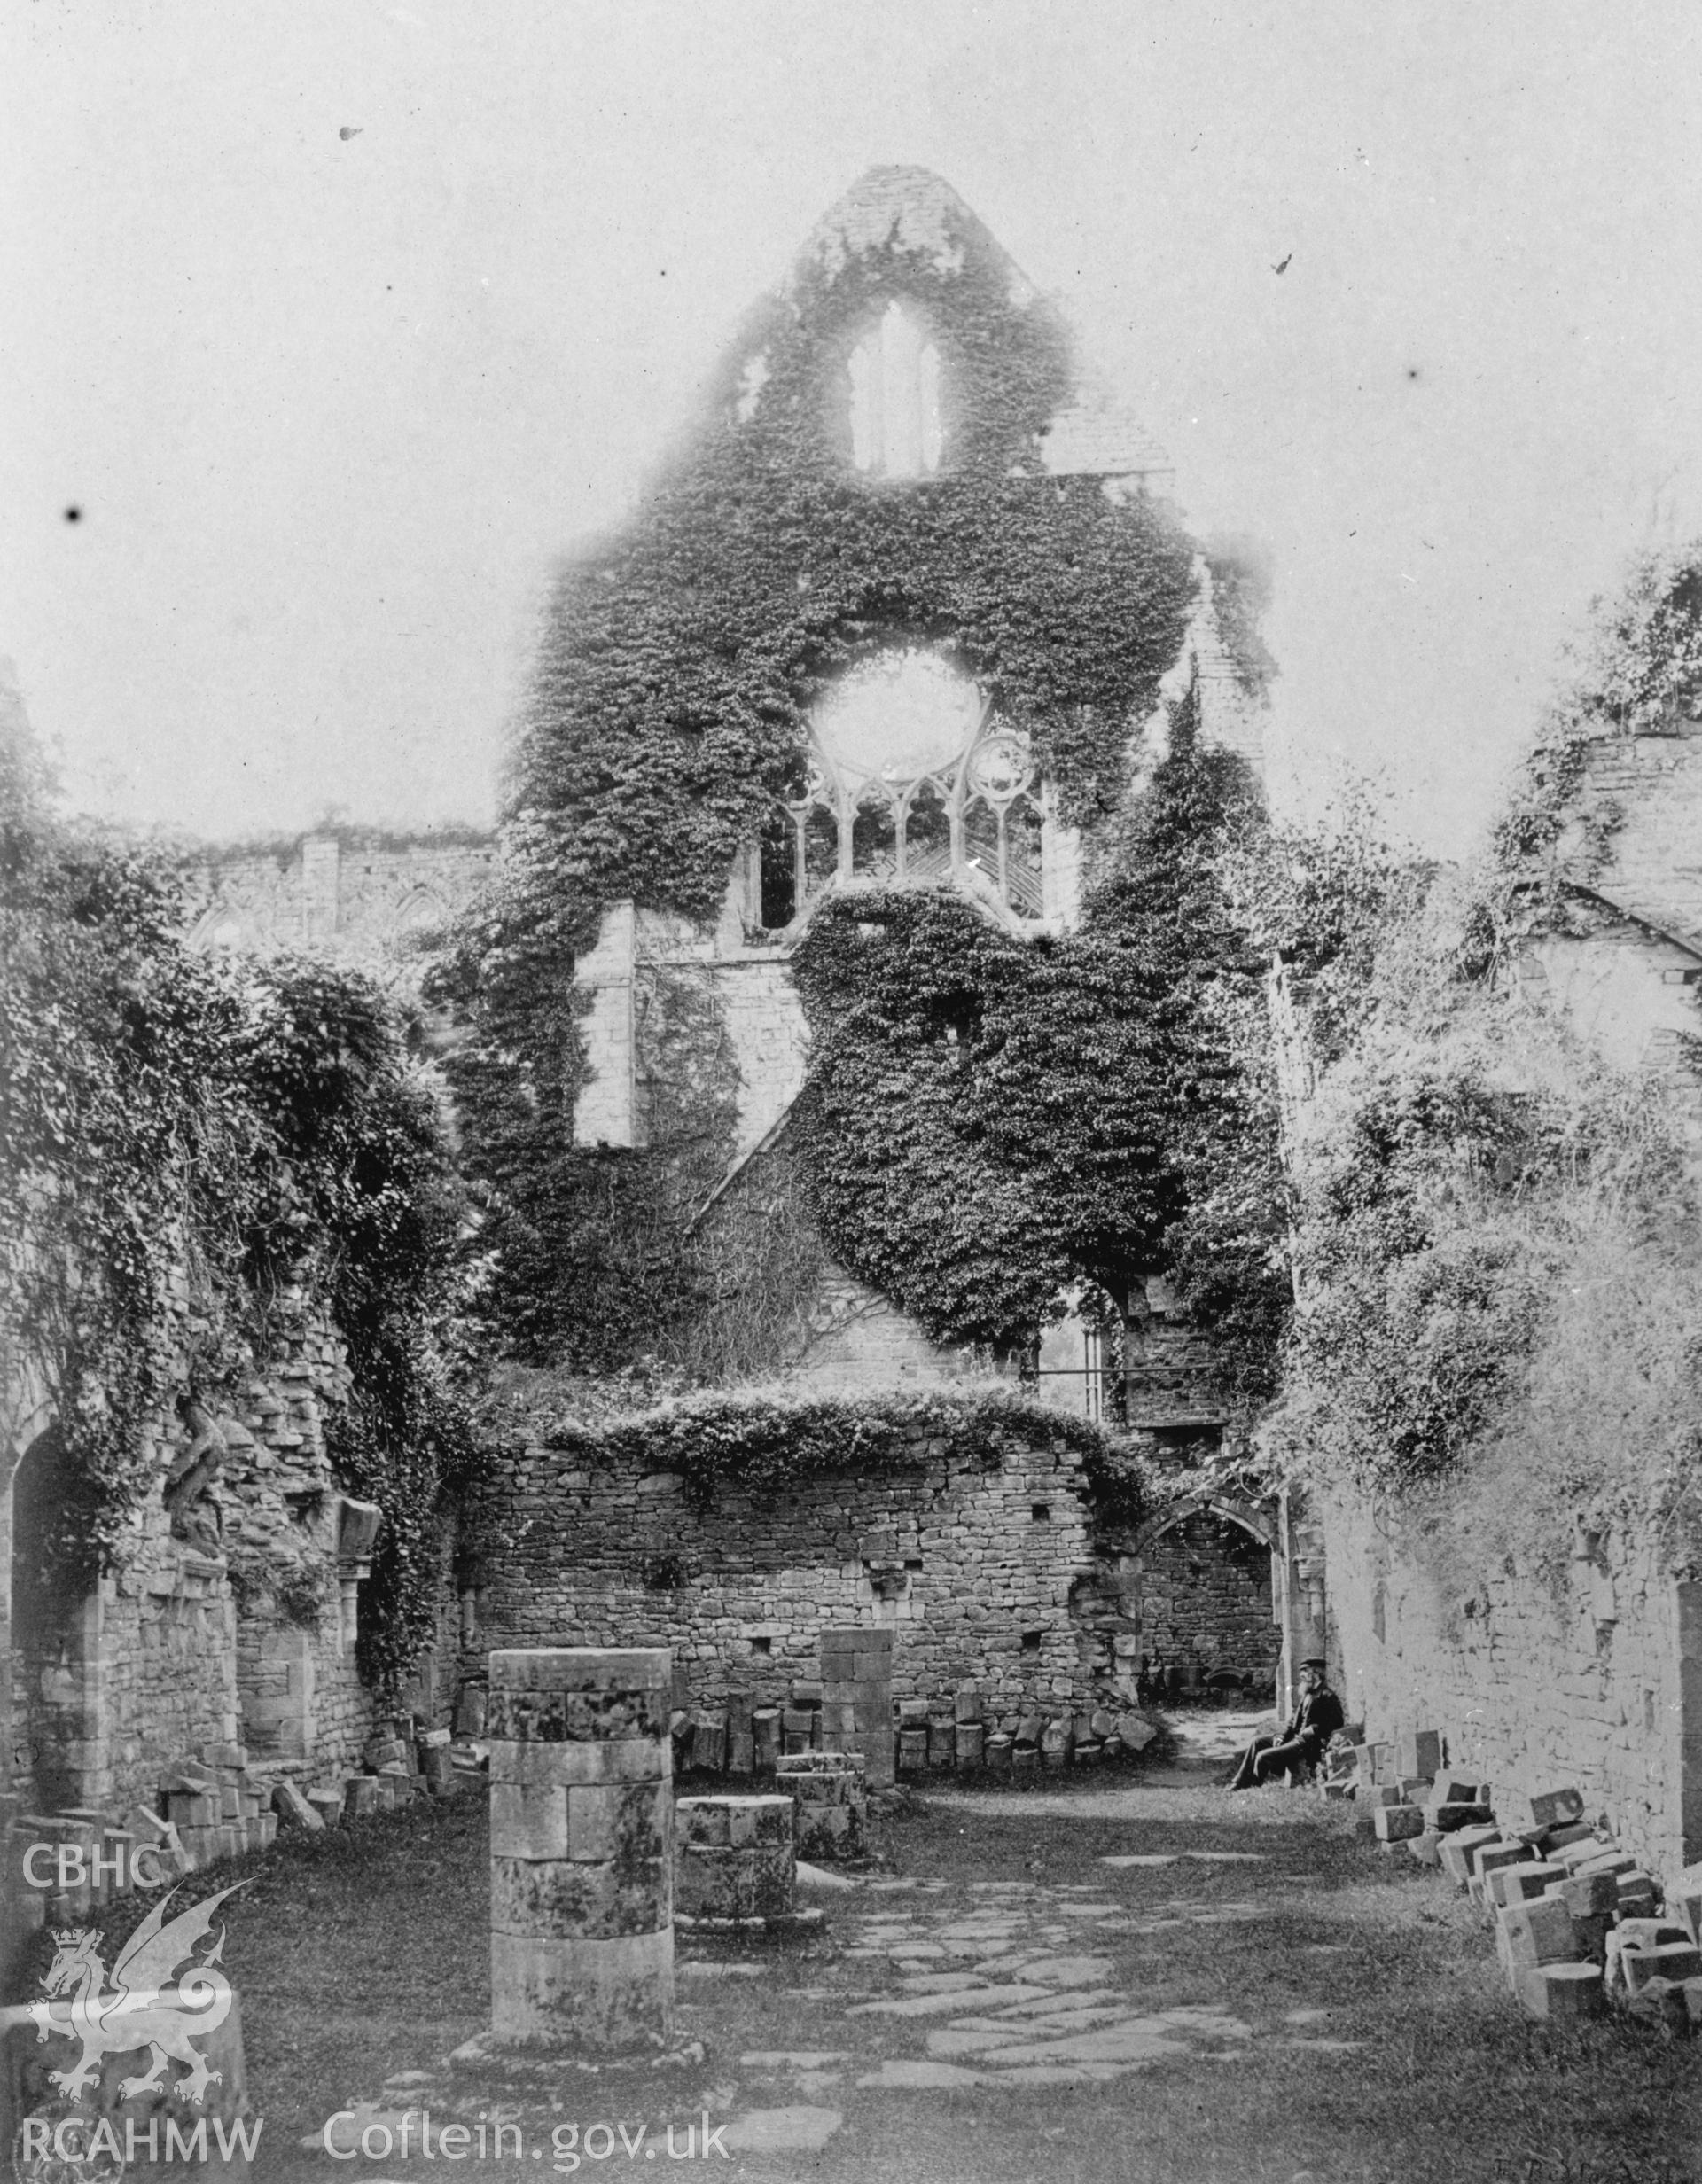 Digital copy of a National Buildings Record photograph showing Tintern Abbey taken by H Felton.